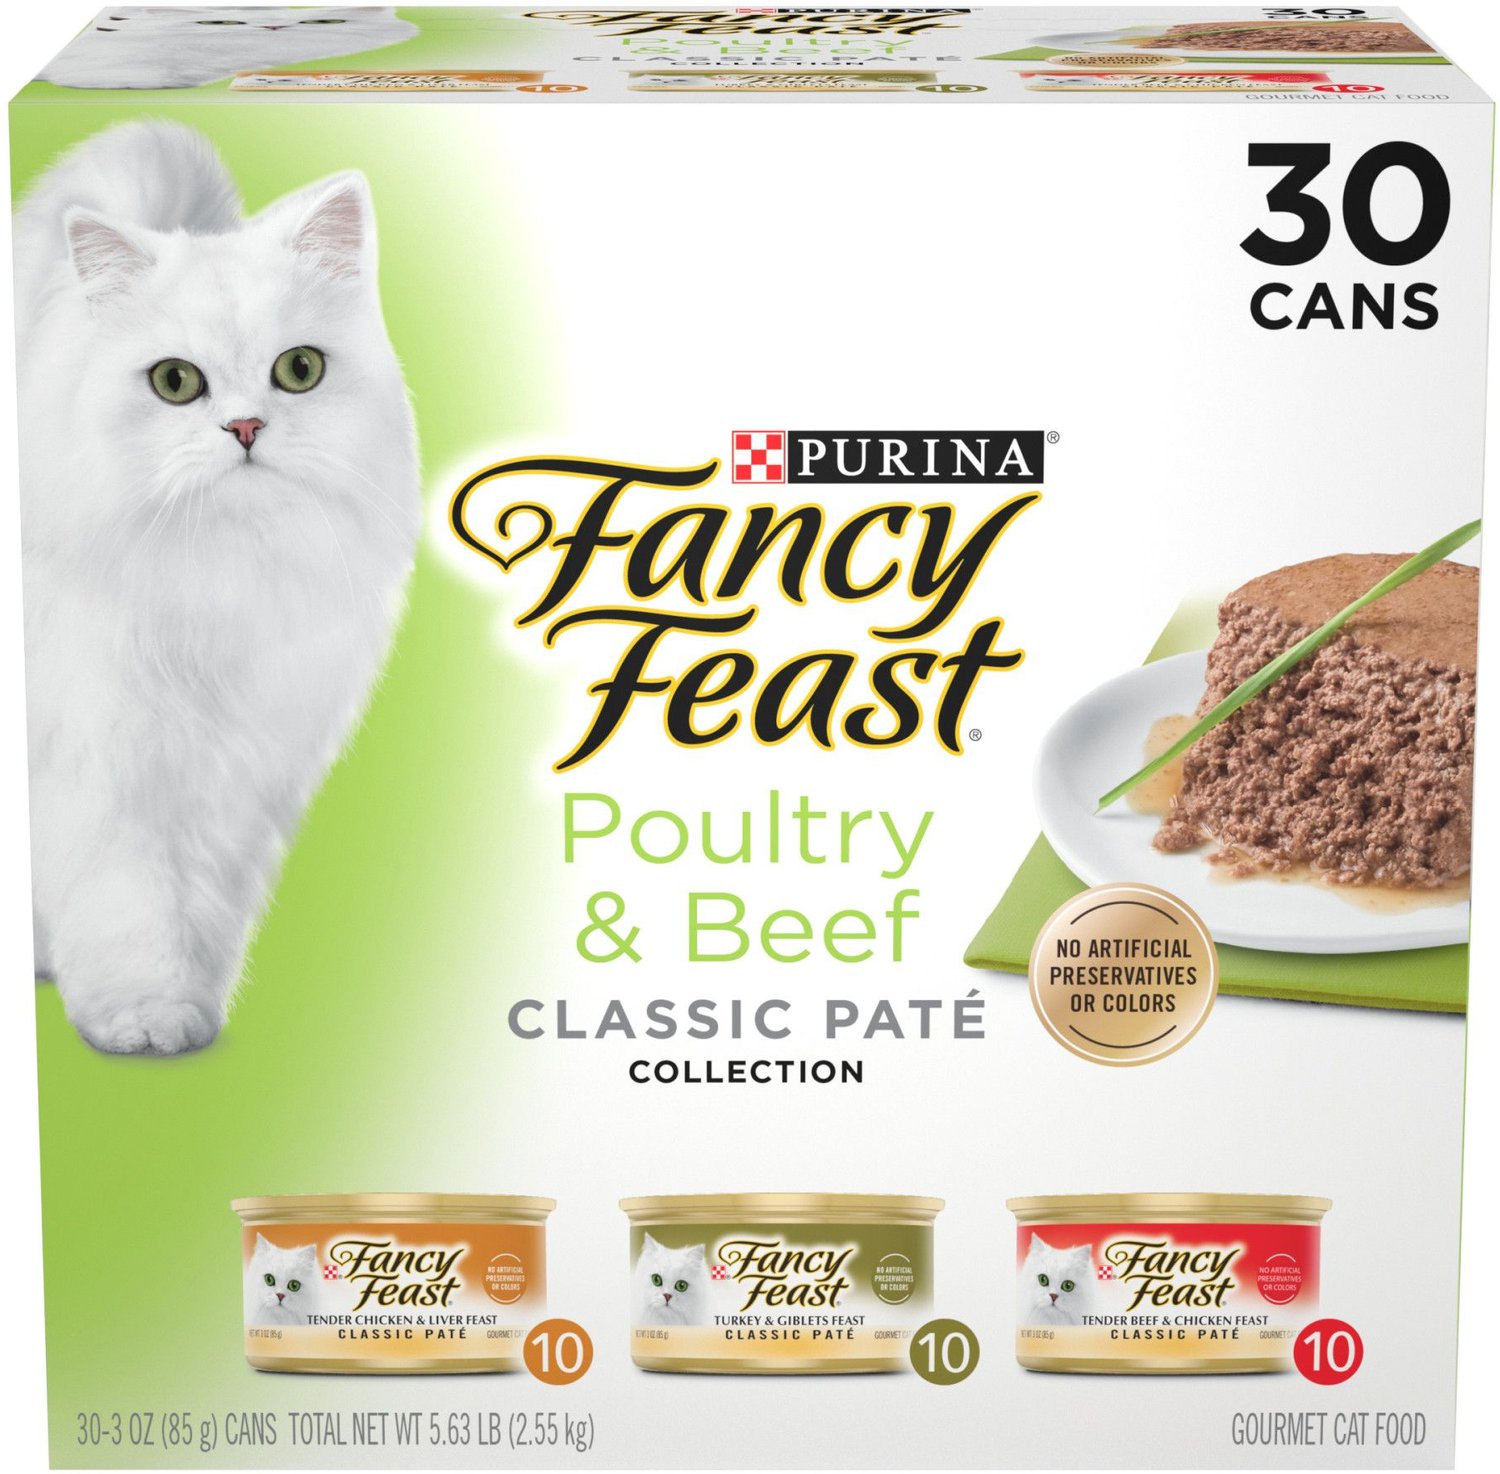 cheapest price for fancy feast cat food